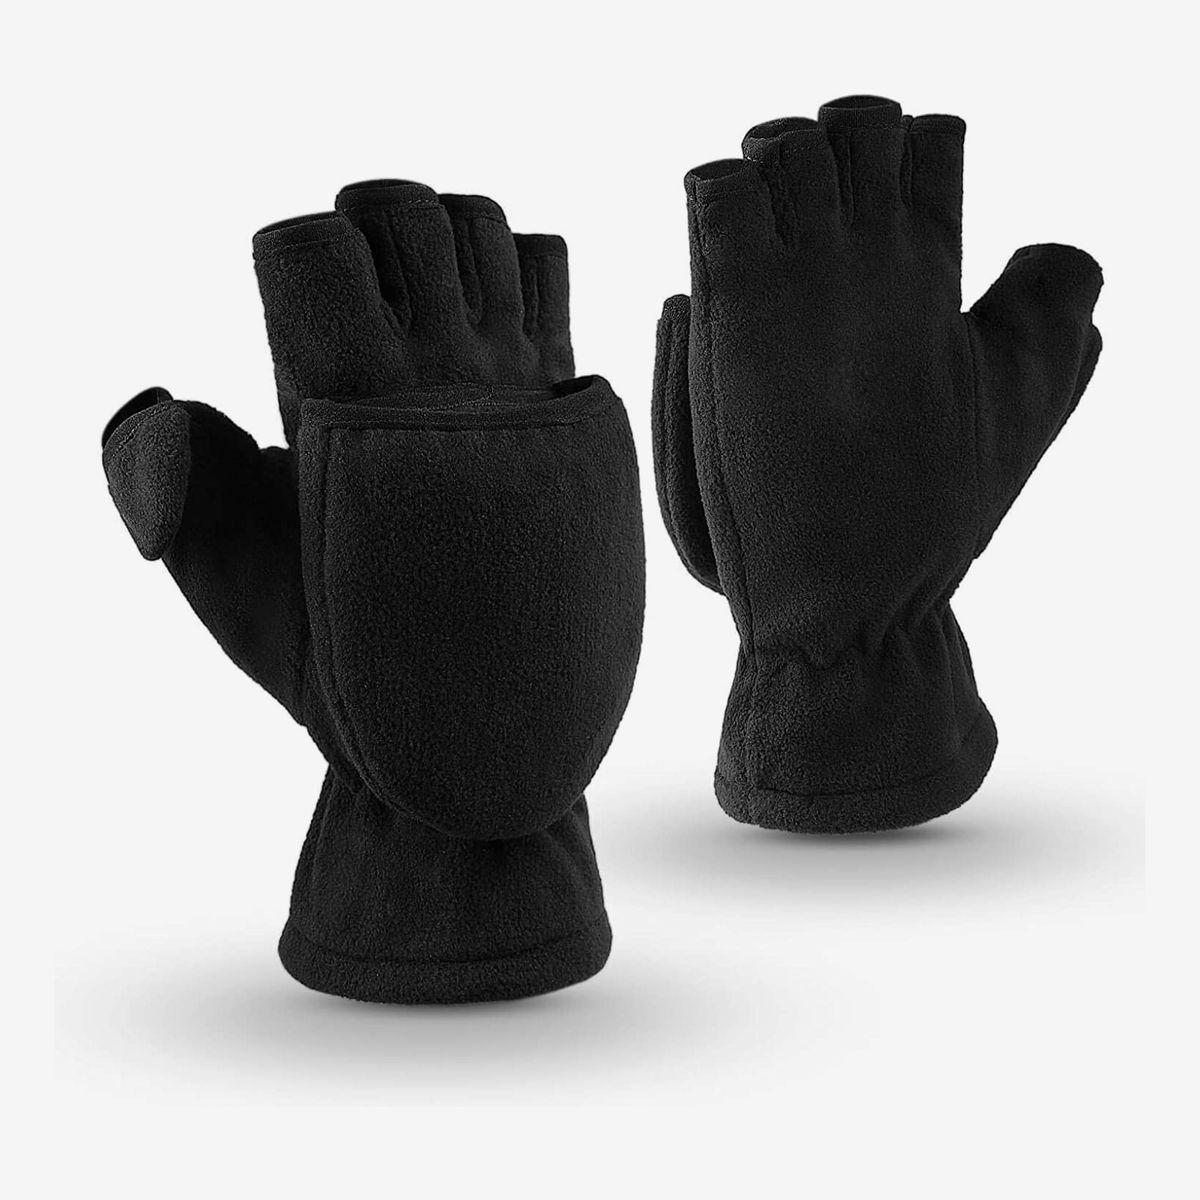 Winter gloves Winter Women Gloves Solid Color Warm Touch Screen Mittens Thicken Thermal Insulation Winter Mittens Gloves Womens Gloves Winter Gloves Full Finger Mittens Knitted For Outdoor Wear-resis